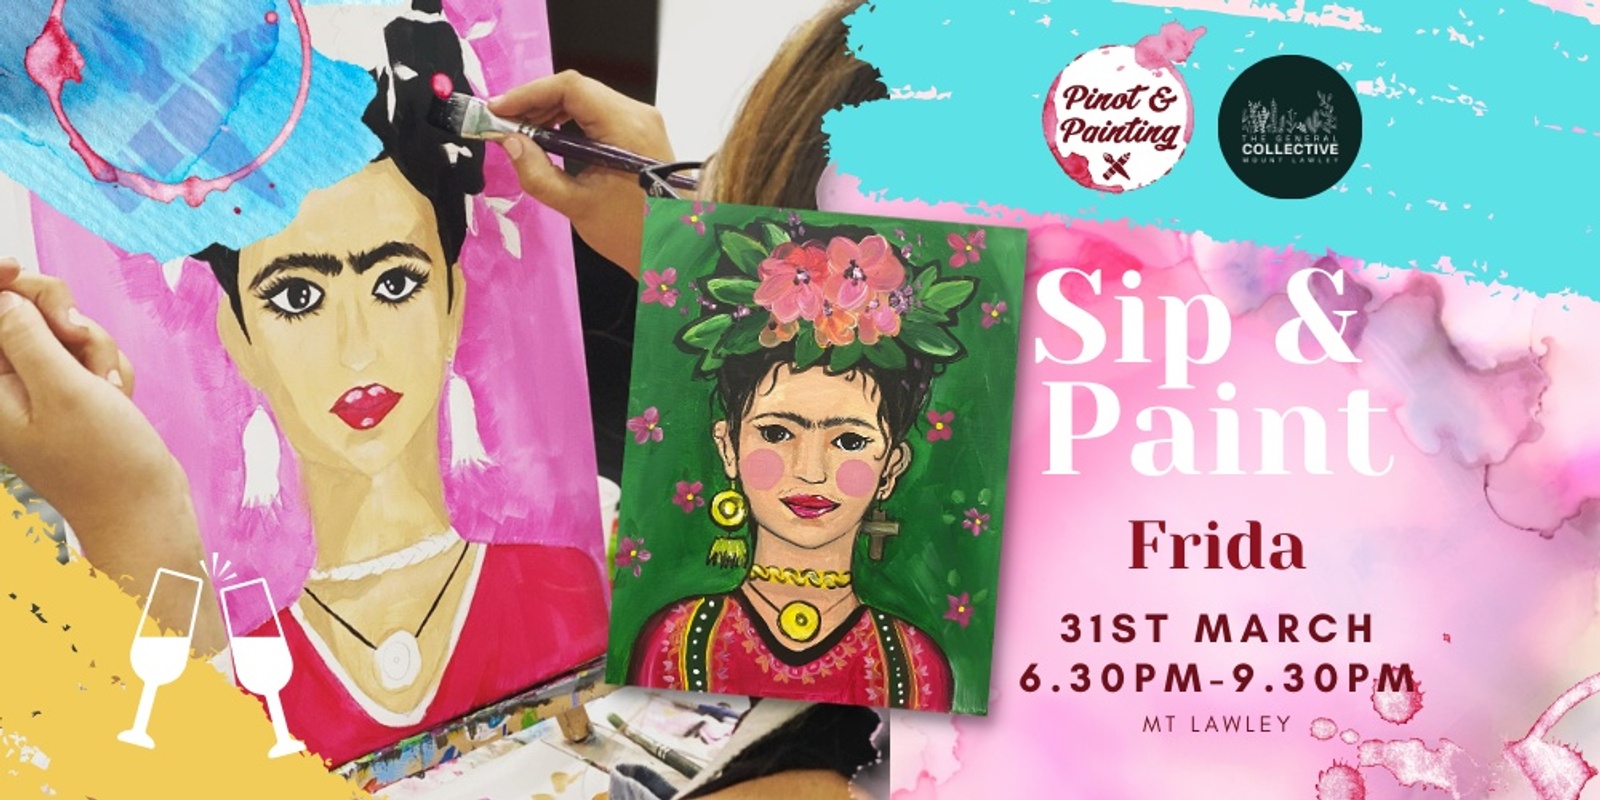 Banner image for Frida Kahlo - Sip & Paint @ The General Collective Studio